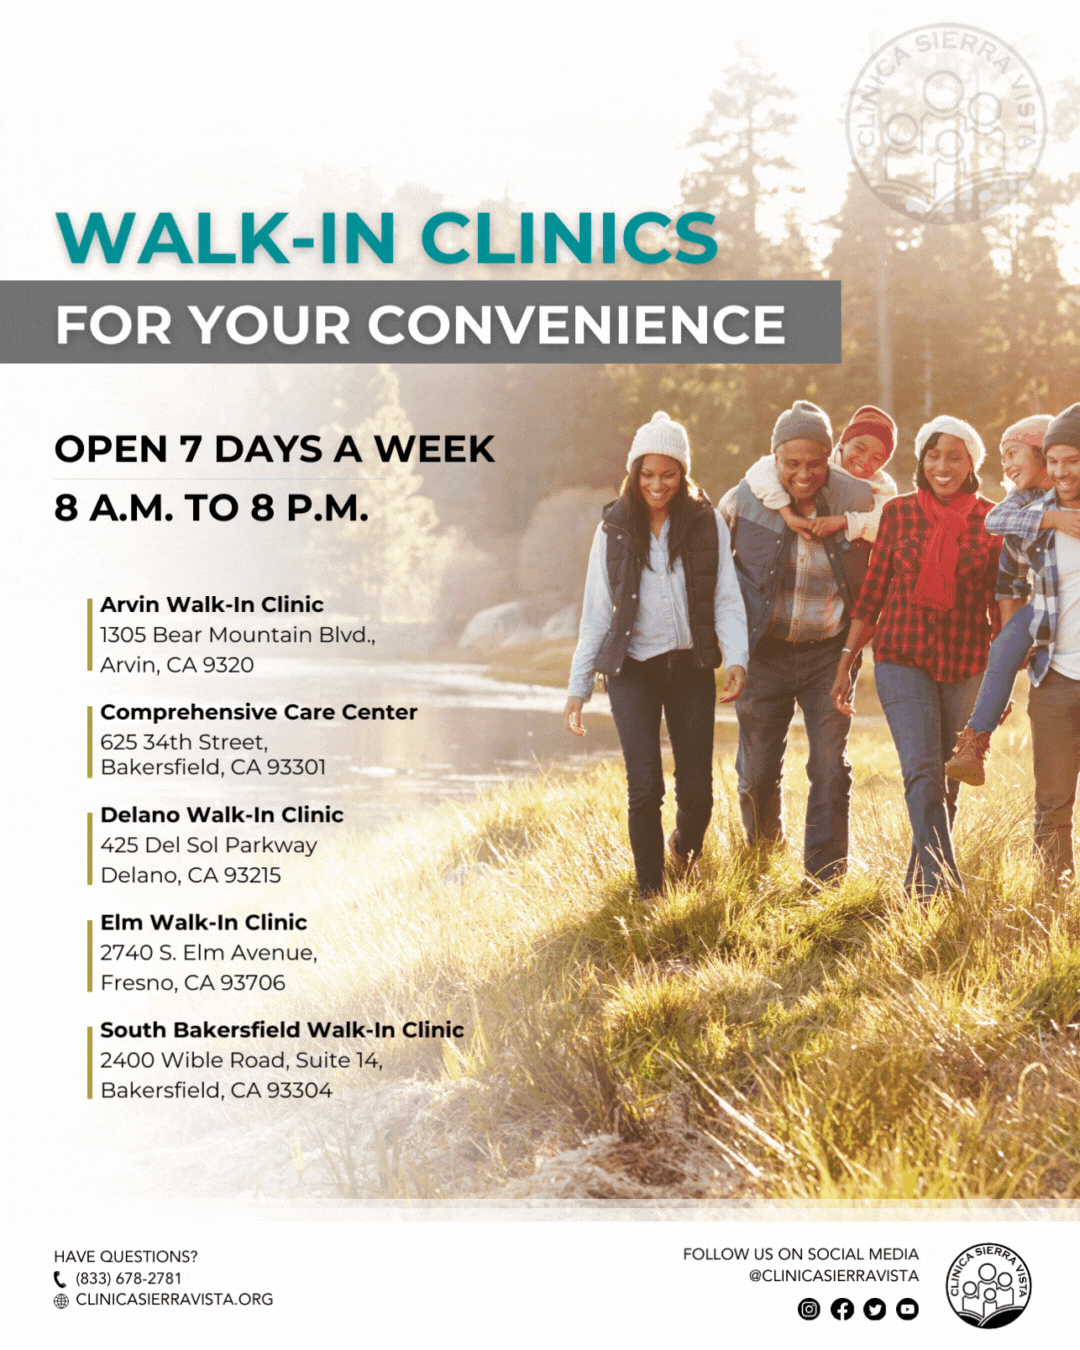 Walk-In Clinics open 7 days a week from 8 AM to 8 PM